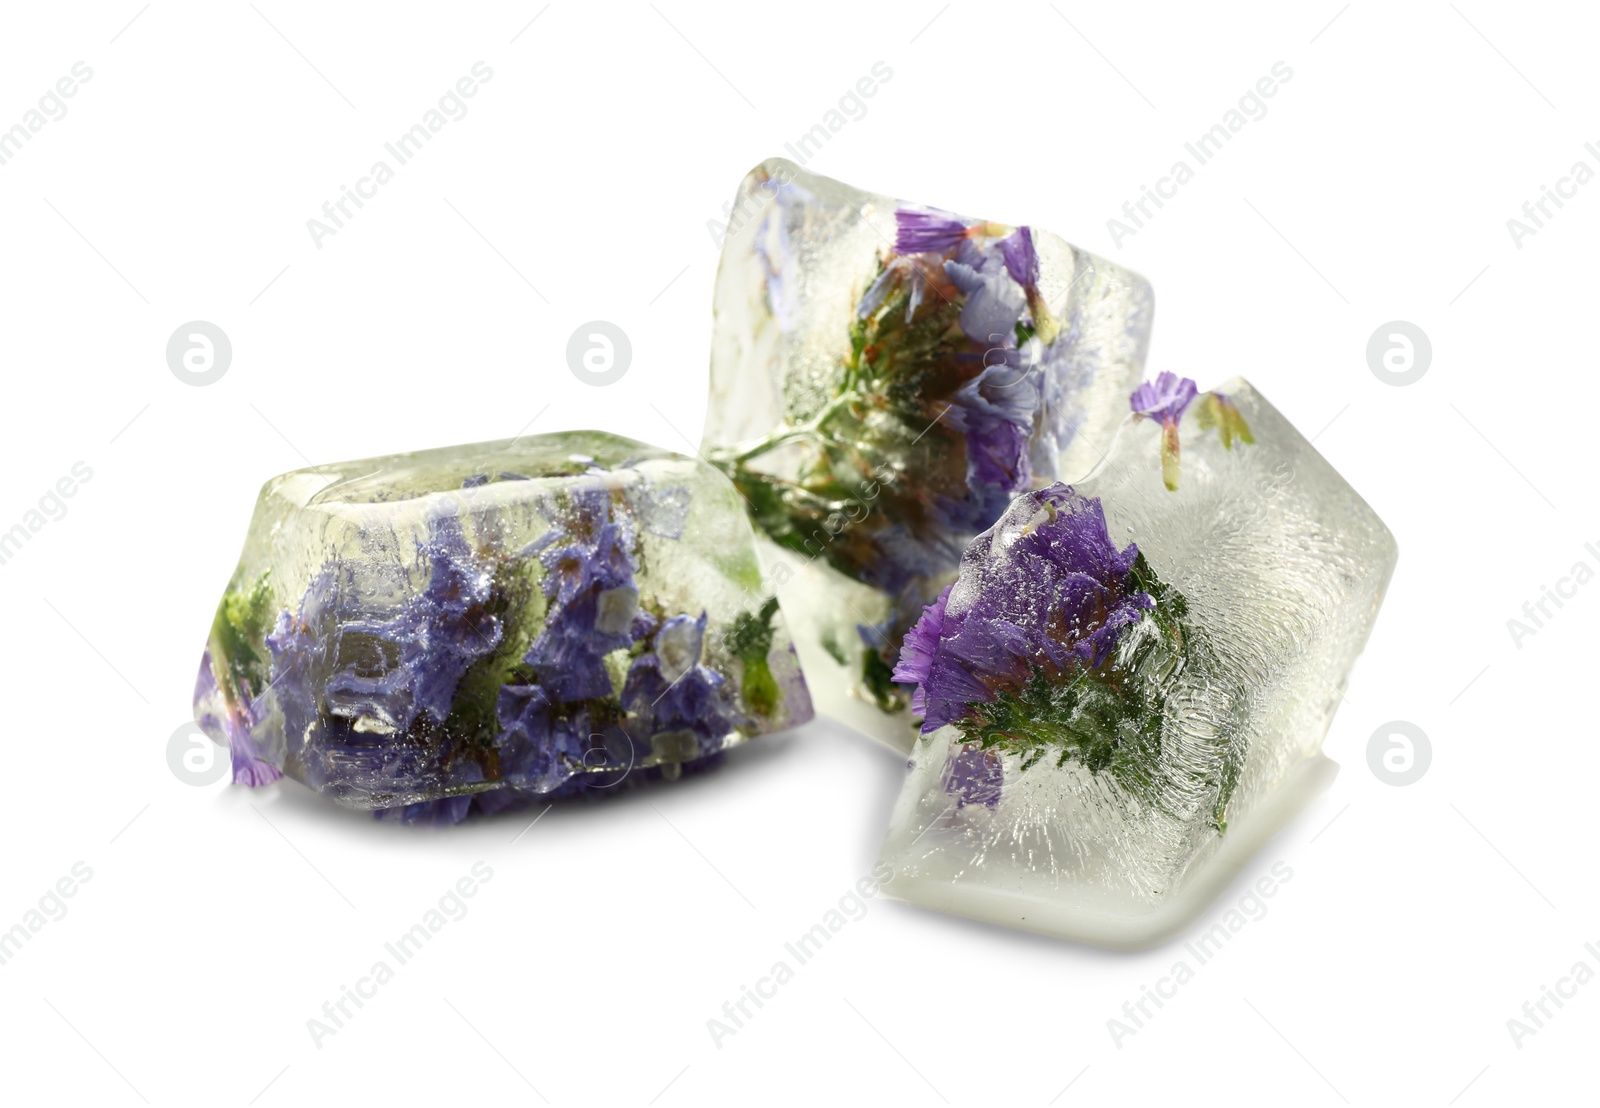 Image of Ice cubes with flowers on white background